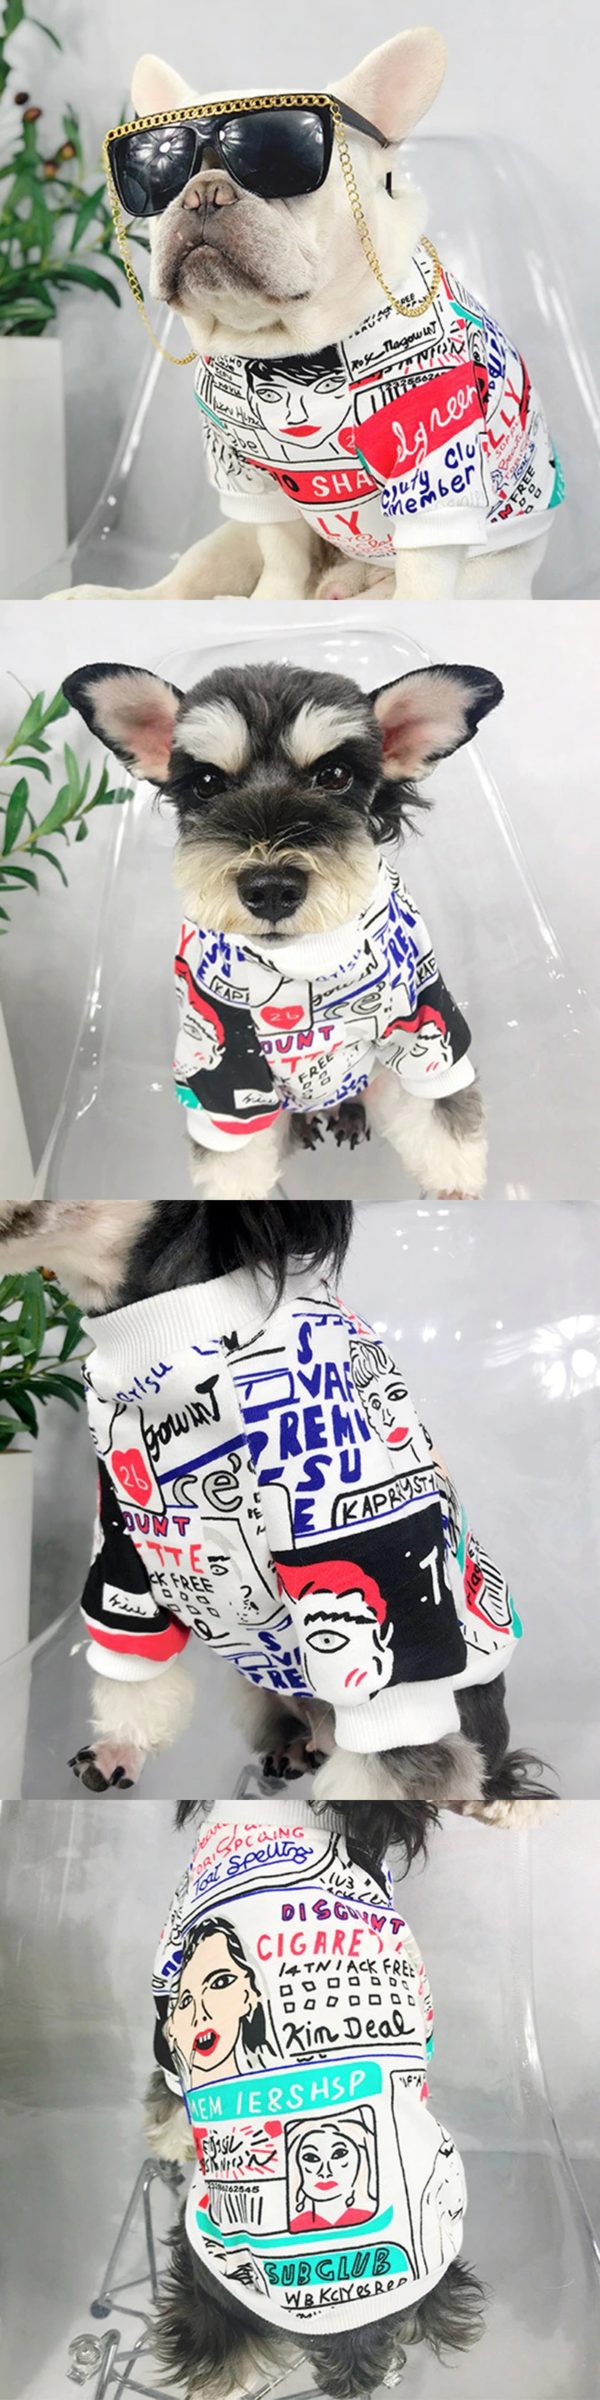 Pug Cotton Print Sweater Pet Dog Clothes for Small Dogs Pets Clothing Costume French Bulldog Summer Breathable Tshirt for Cat